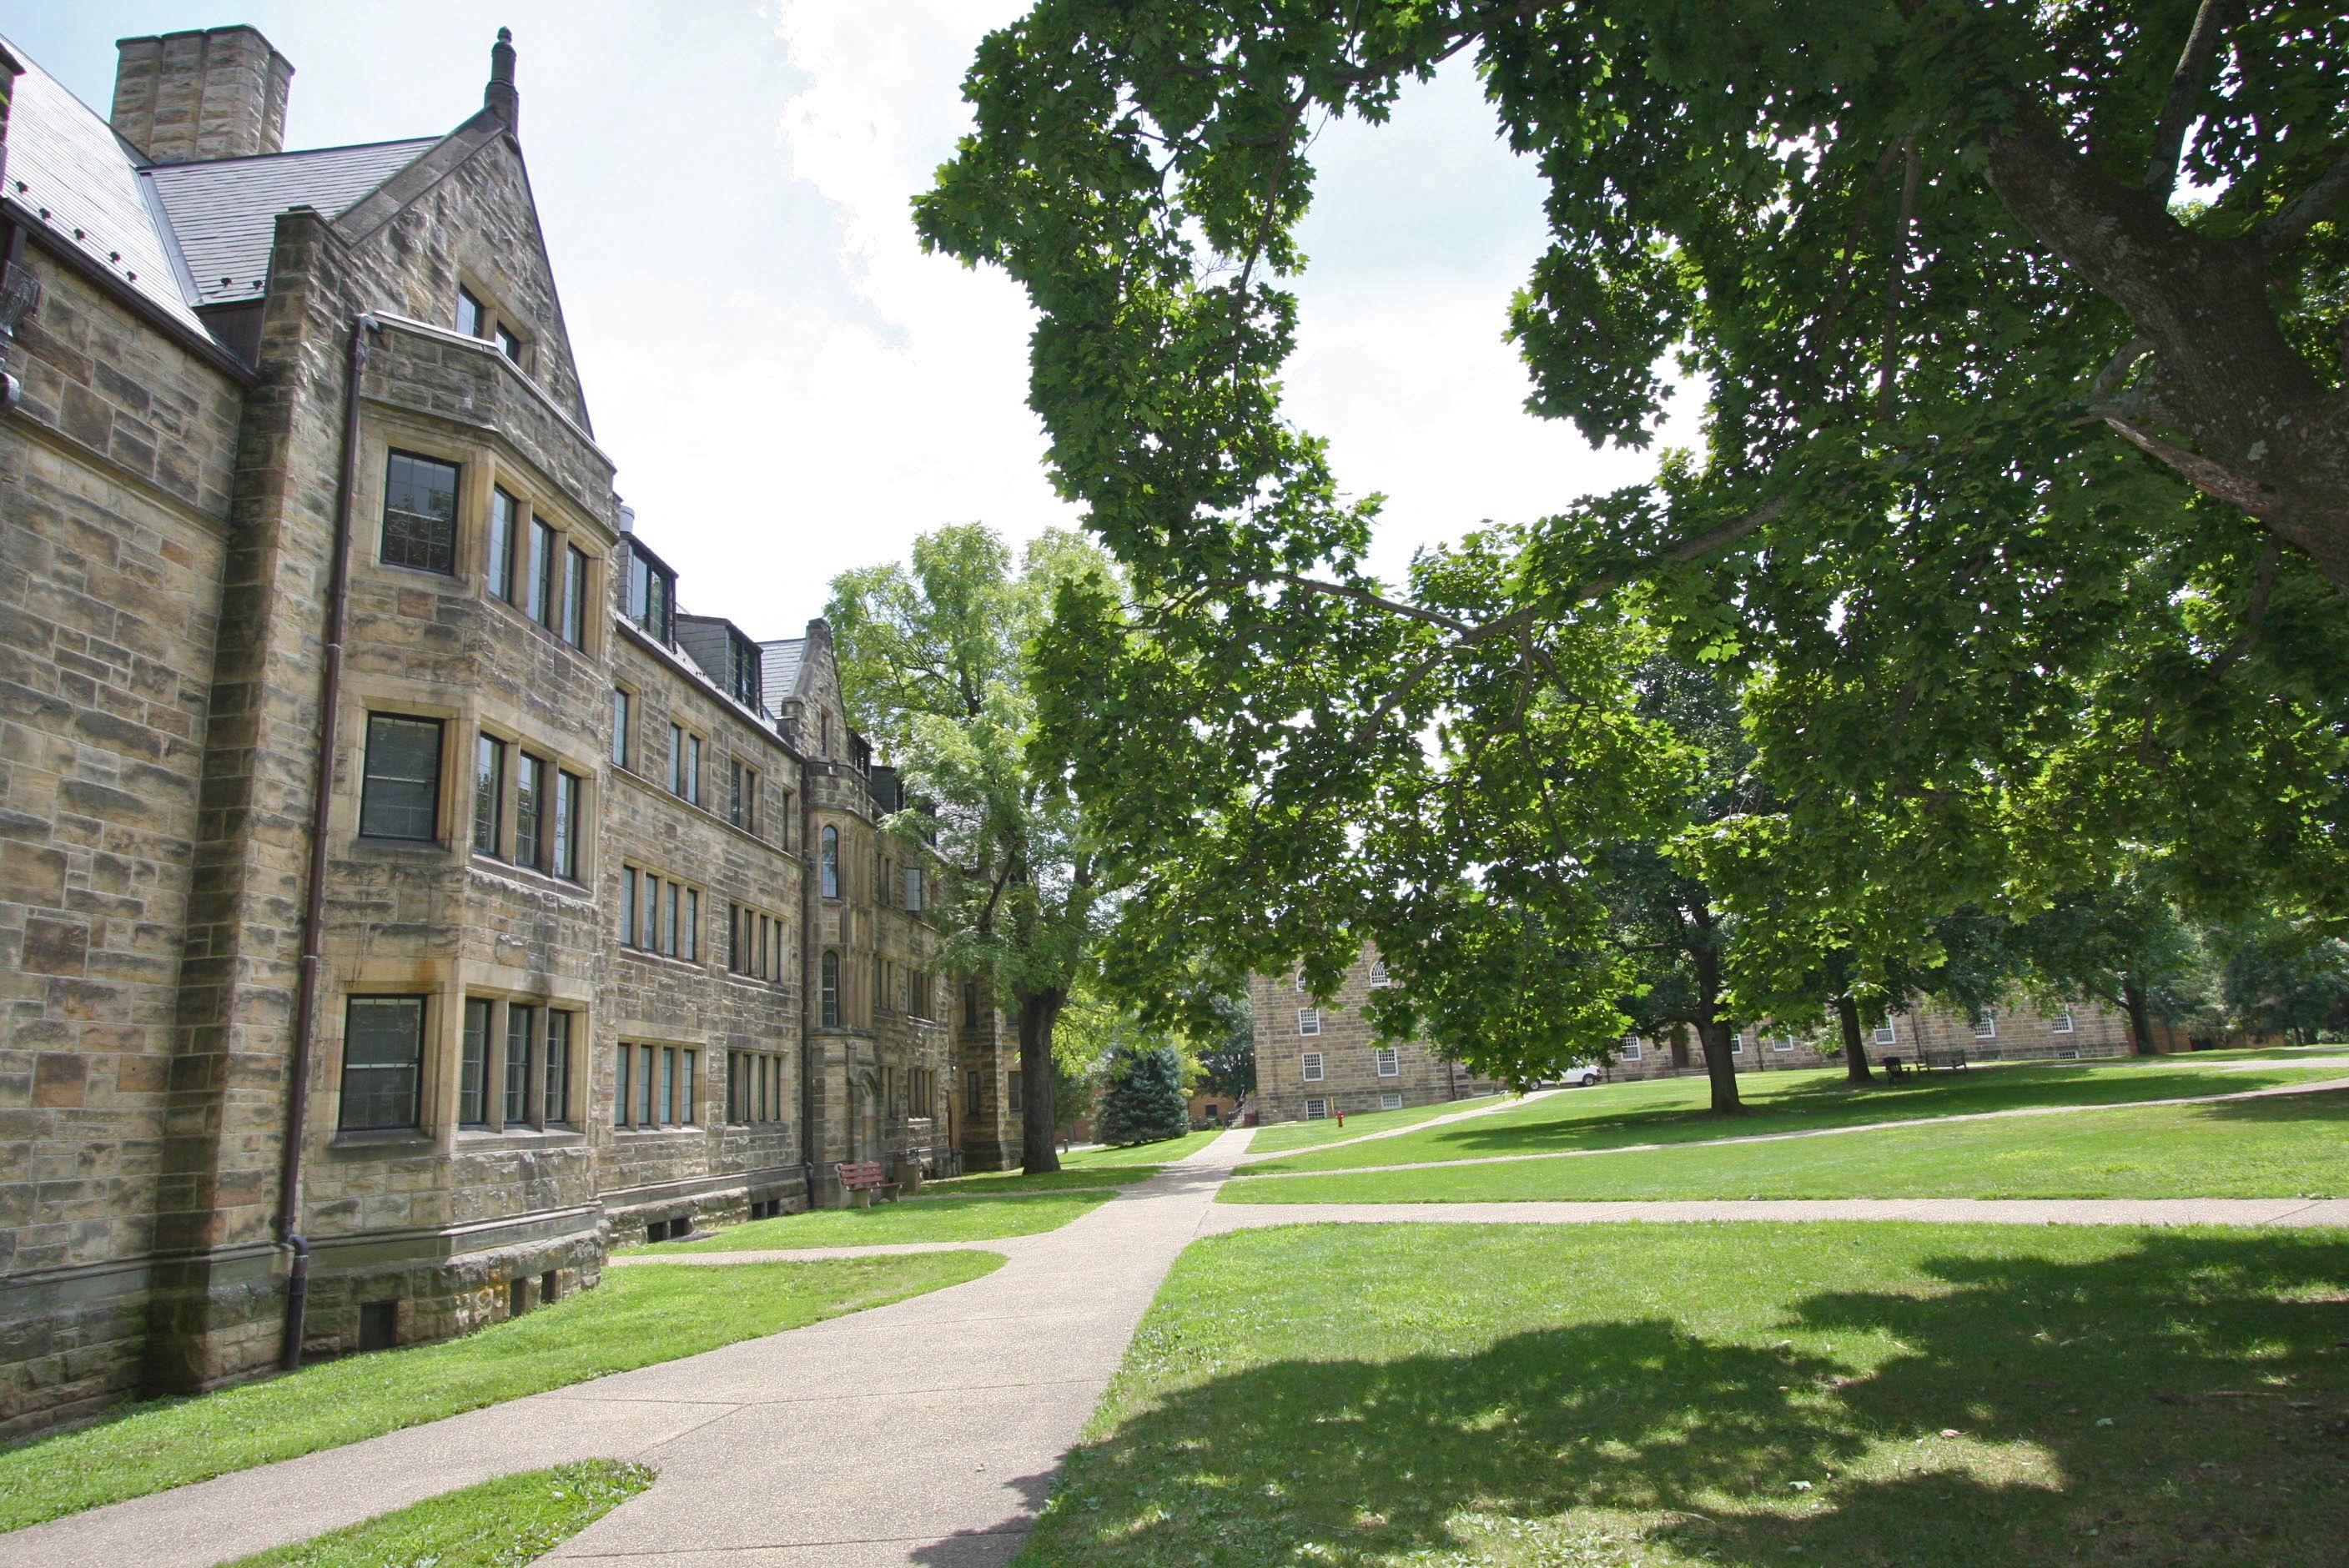 Kenyon College Campus in Gambier Ohio. Photo by Sam Miller of http